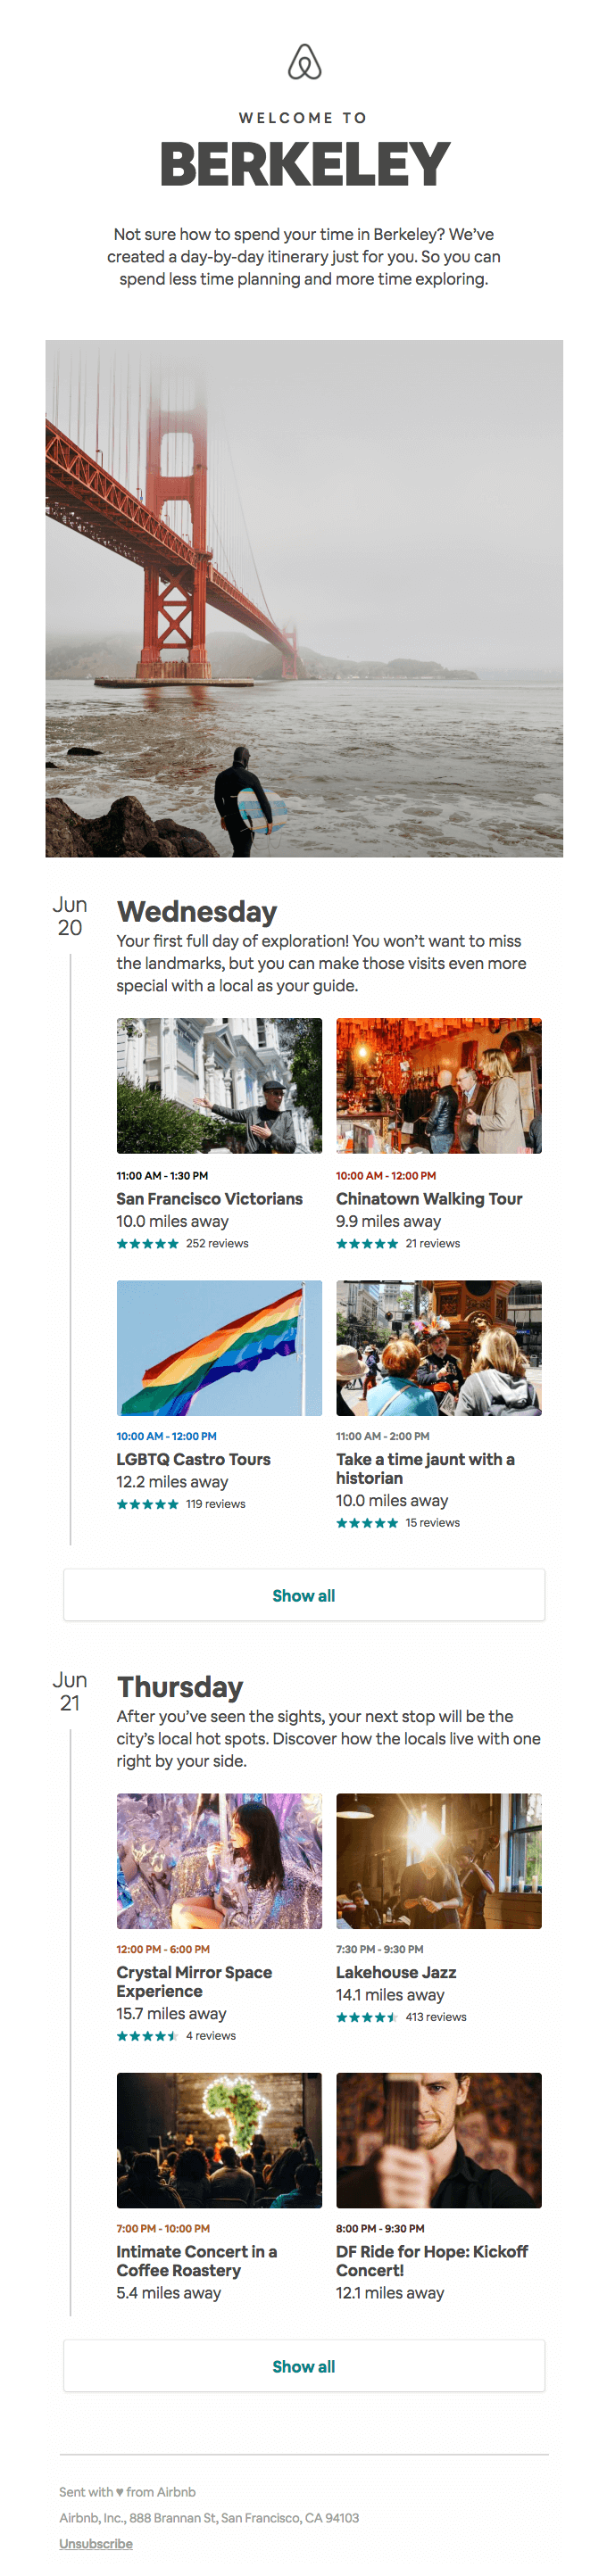 Email from Airbnb containing travel inspiration